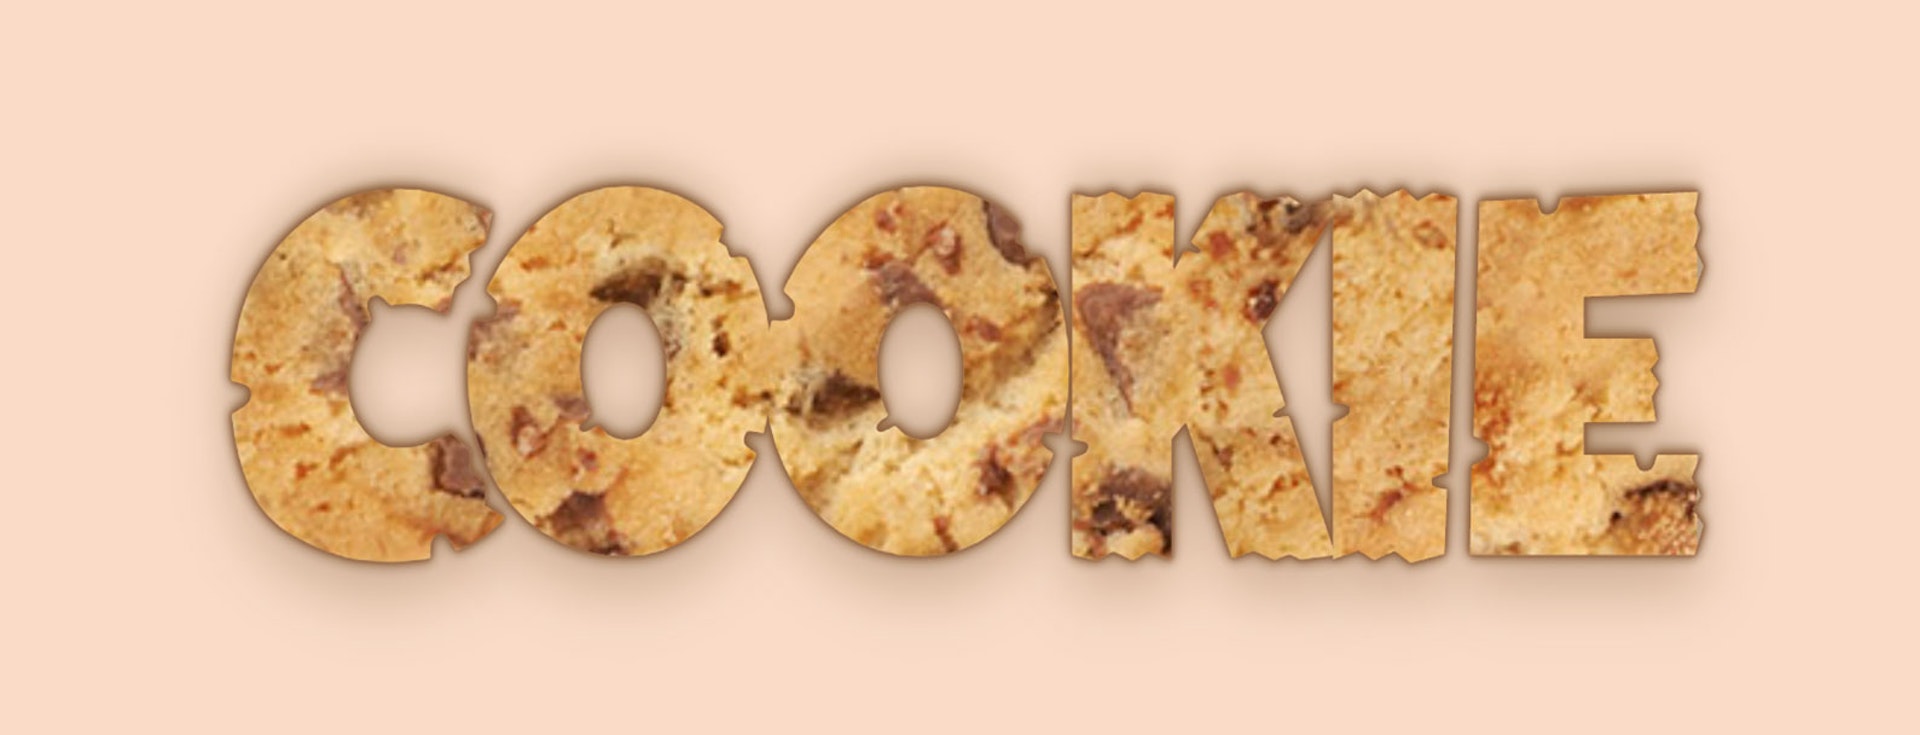 Cookie text with a cookie texture and a drop shadow for depth